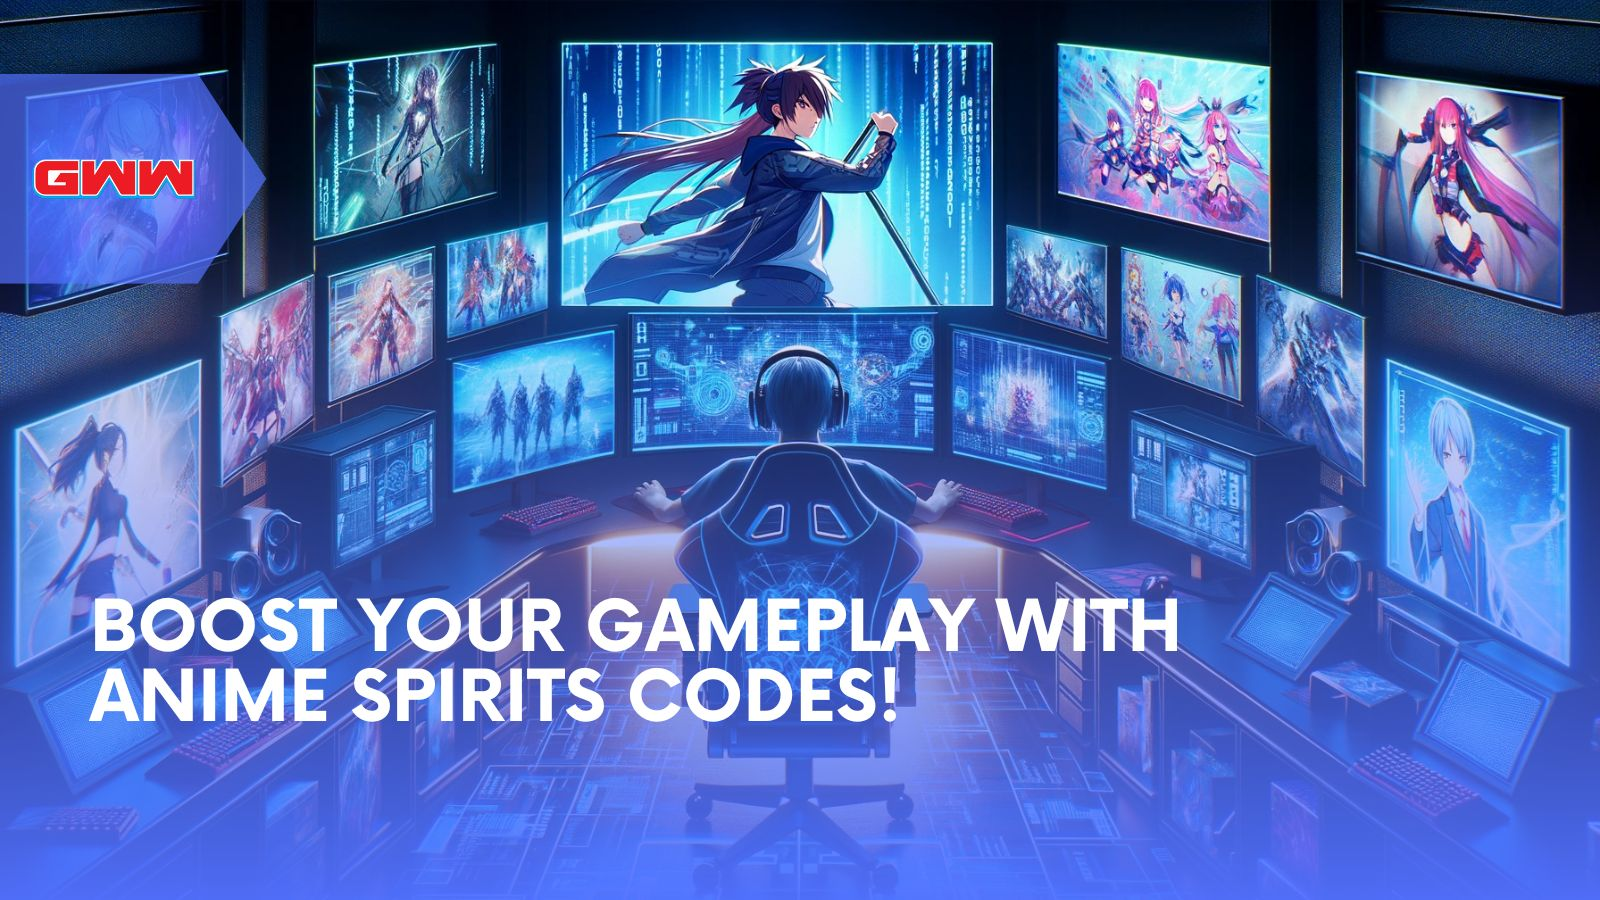 Boost Your Gameplay with Anime Spirits Codes!